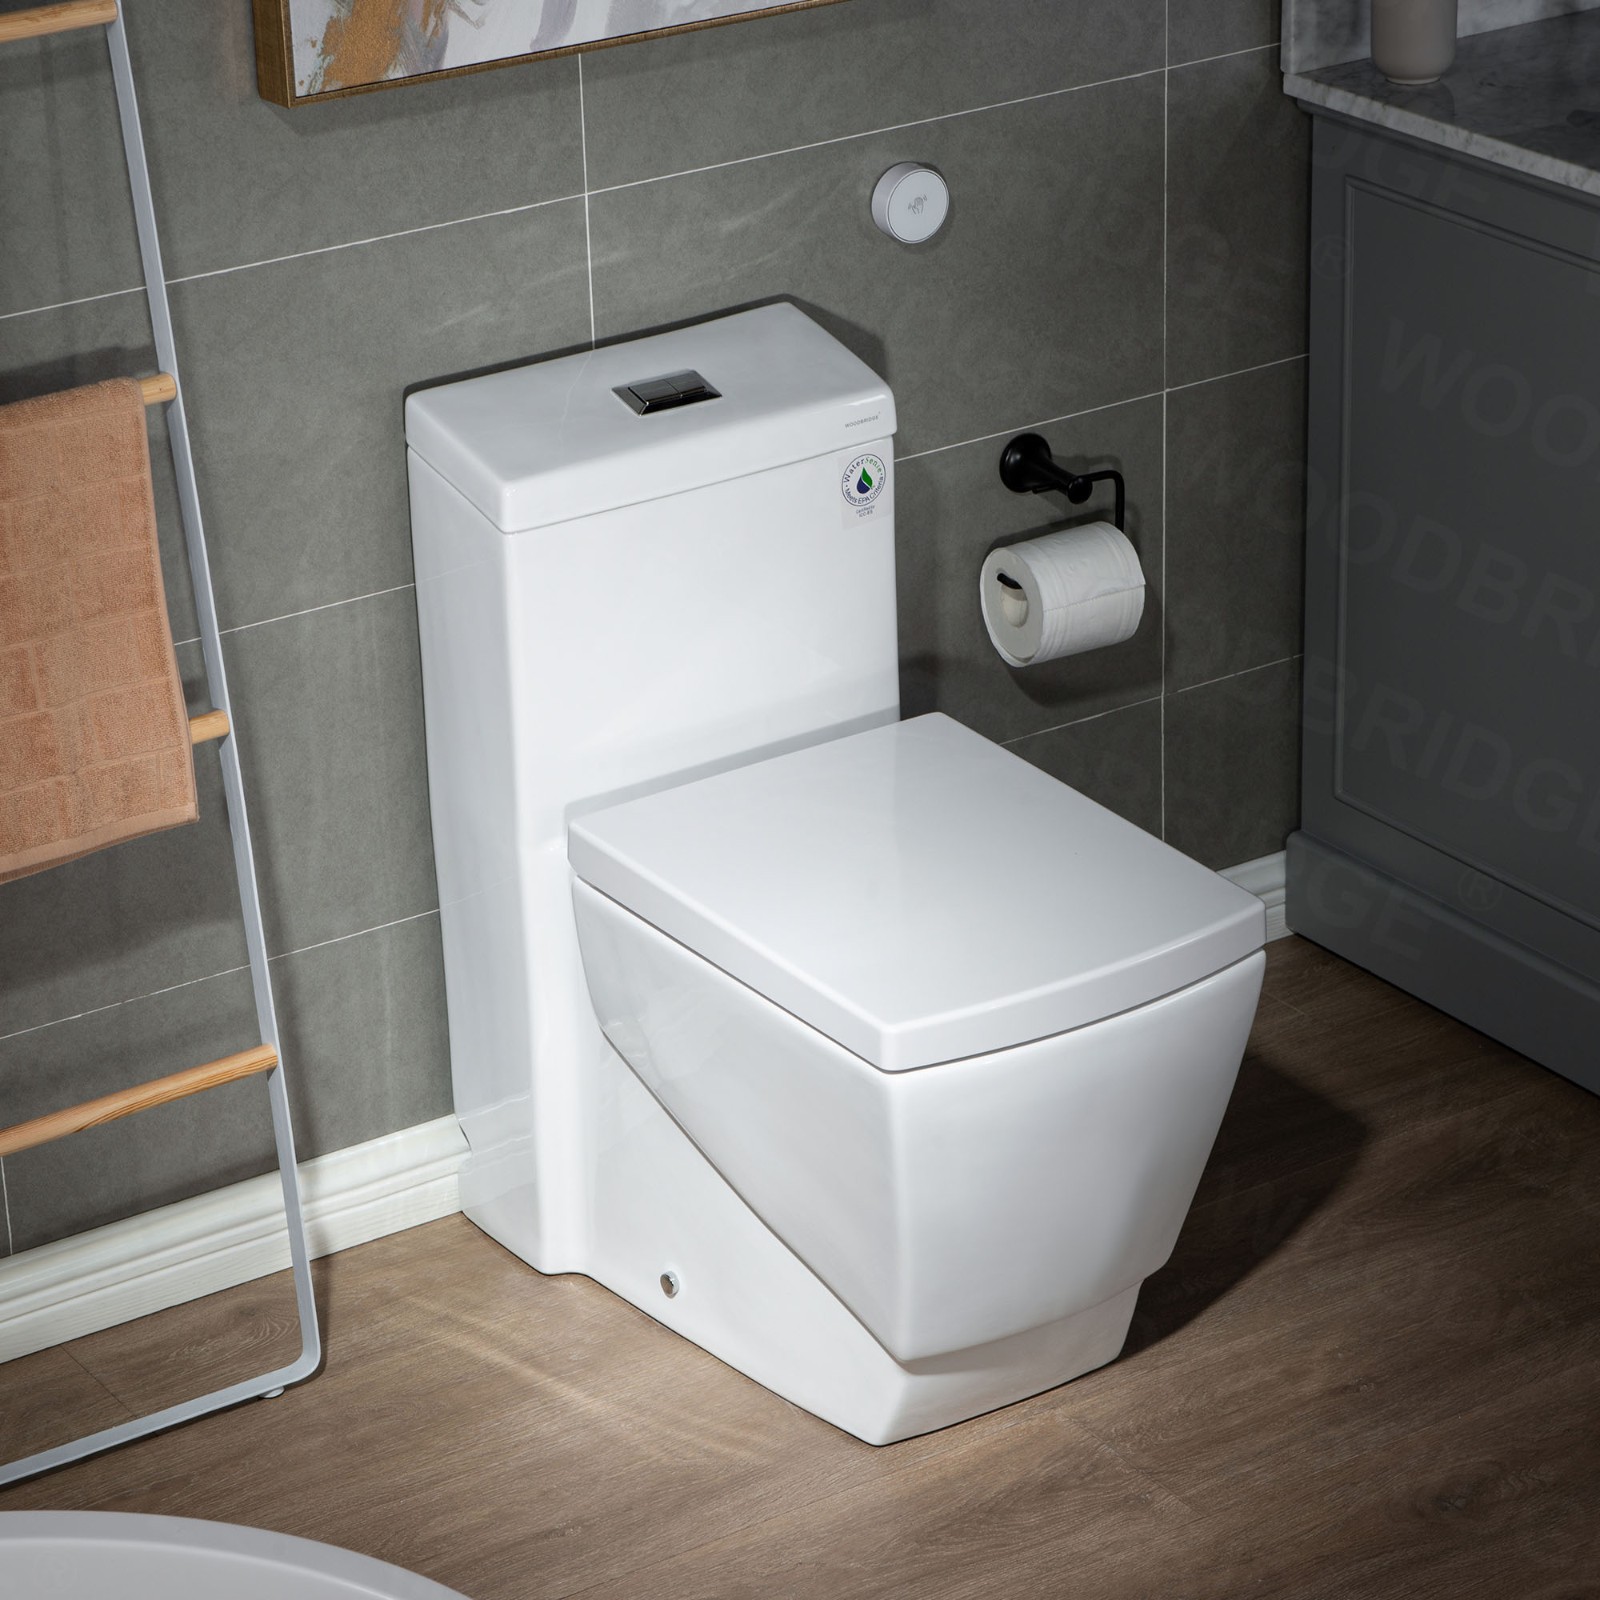  WOODBRIDGE B-0920-A Modern One-Piece Elongated Square toilet with Solf Closed Seat and Hand Free Touchless Sensor Flush Kit, White_5463